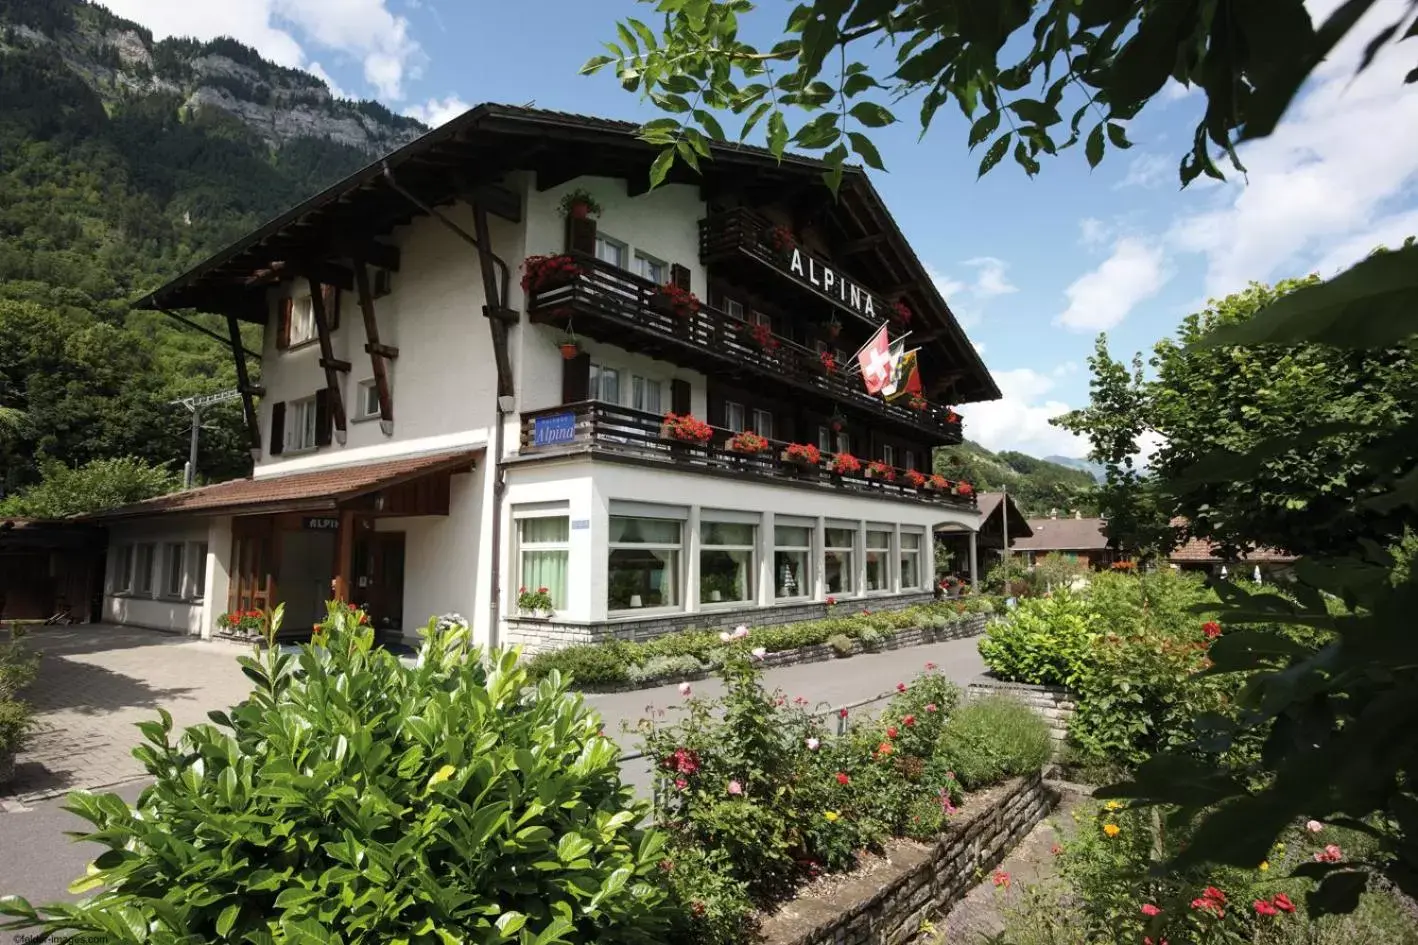 Property Building in Alpina Boutique Hotel Ringgenberg